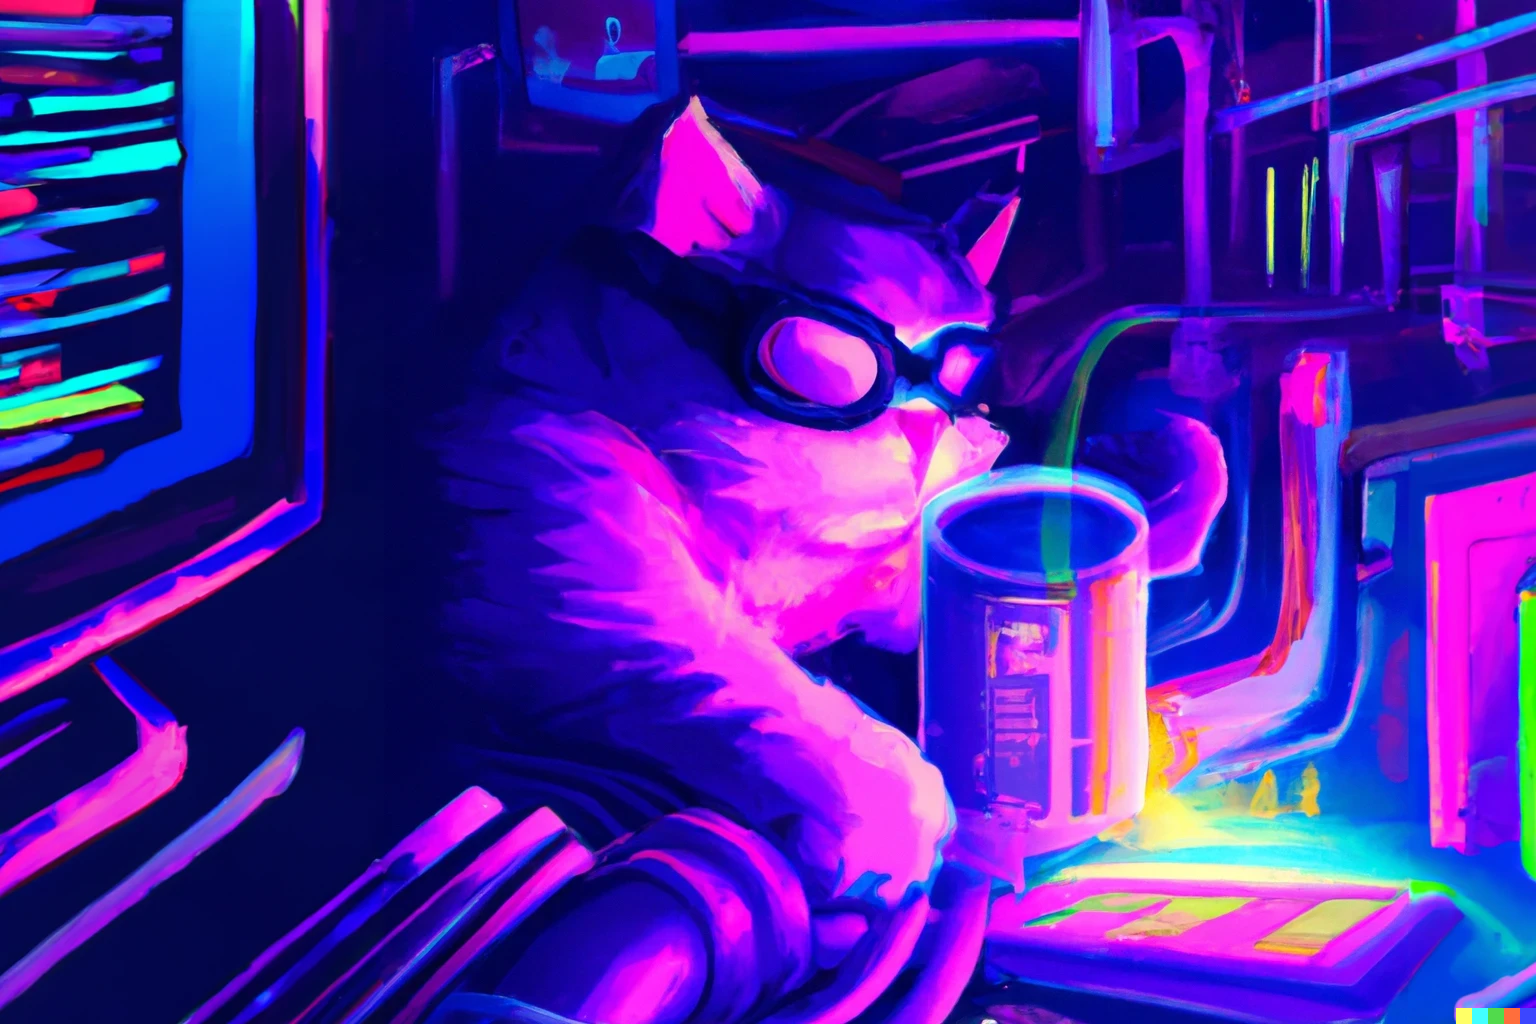 A cyberpunk painting of a cat with goggles tampering with a pipeline in a data center. Everything is bathed in neon in shades of electric pink, vivid purple, shocking cyan, and lime green. The hacker cat looks intent, one paw on the pipeline to ensure all the fluid bits are pilfered into its canister.